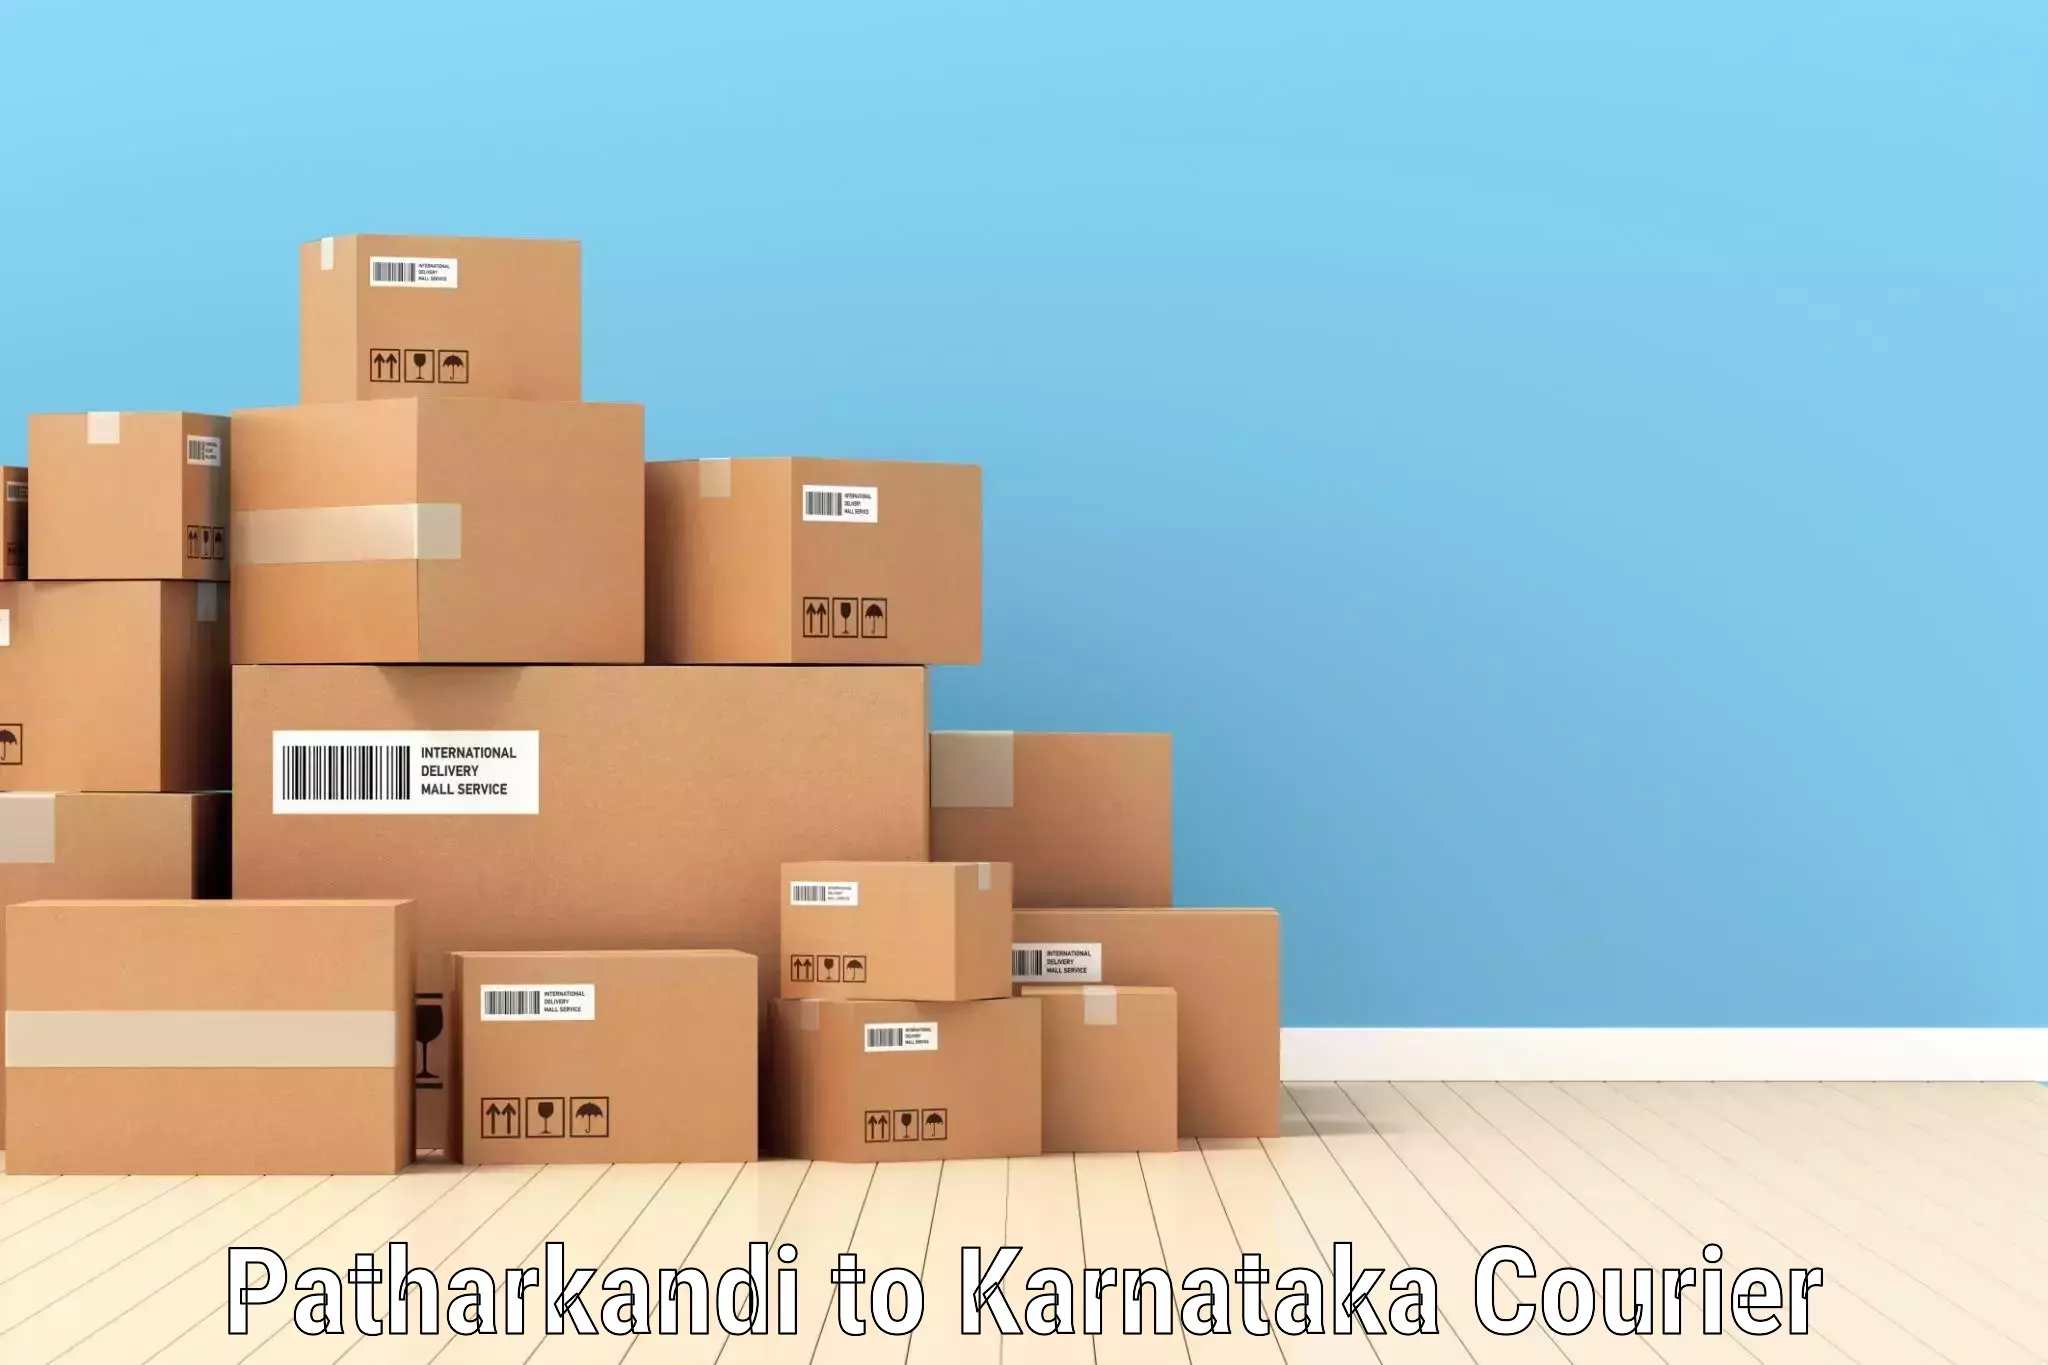 Sustainable courier practices Patharkandi to Mangalore Port